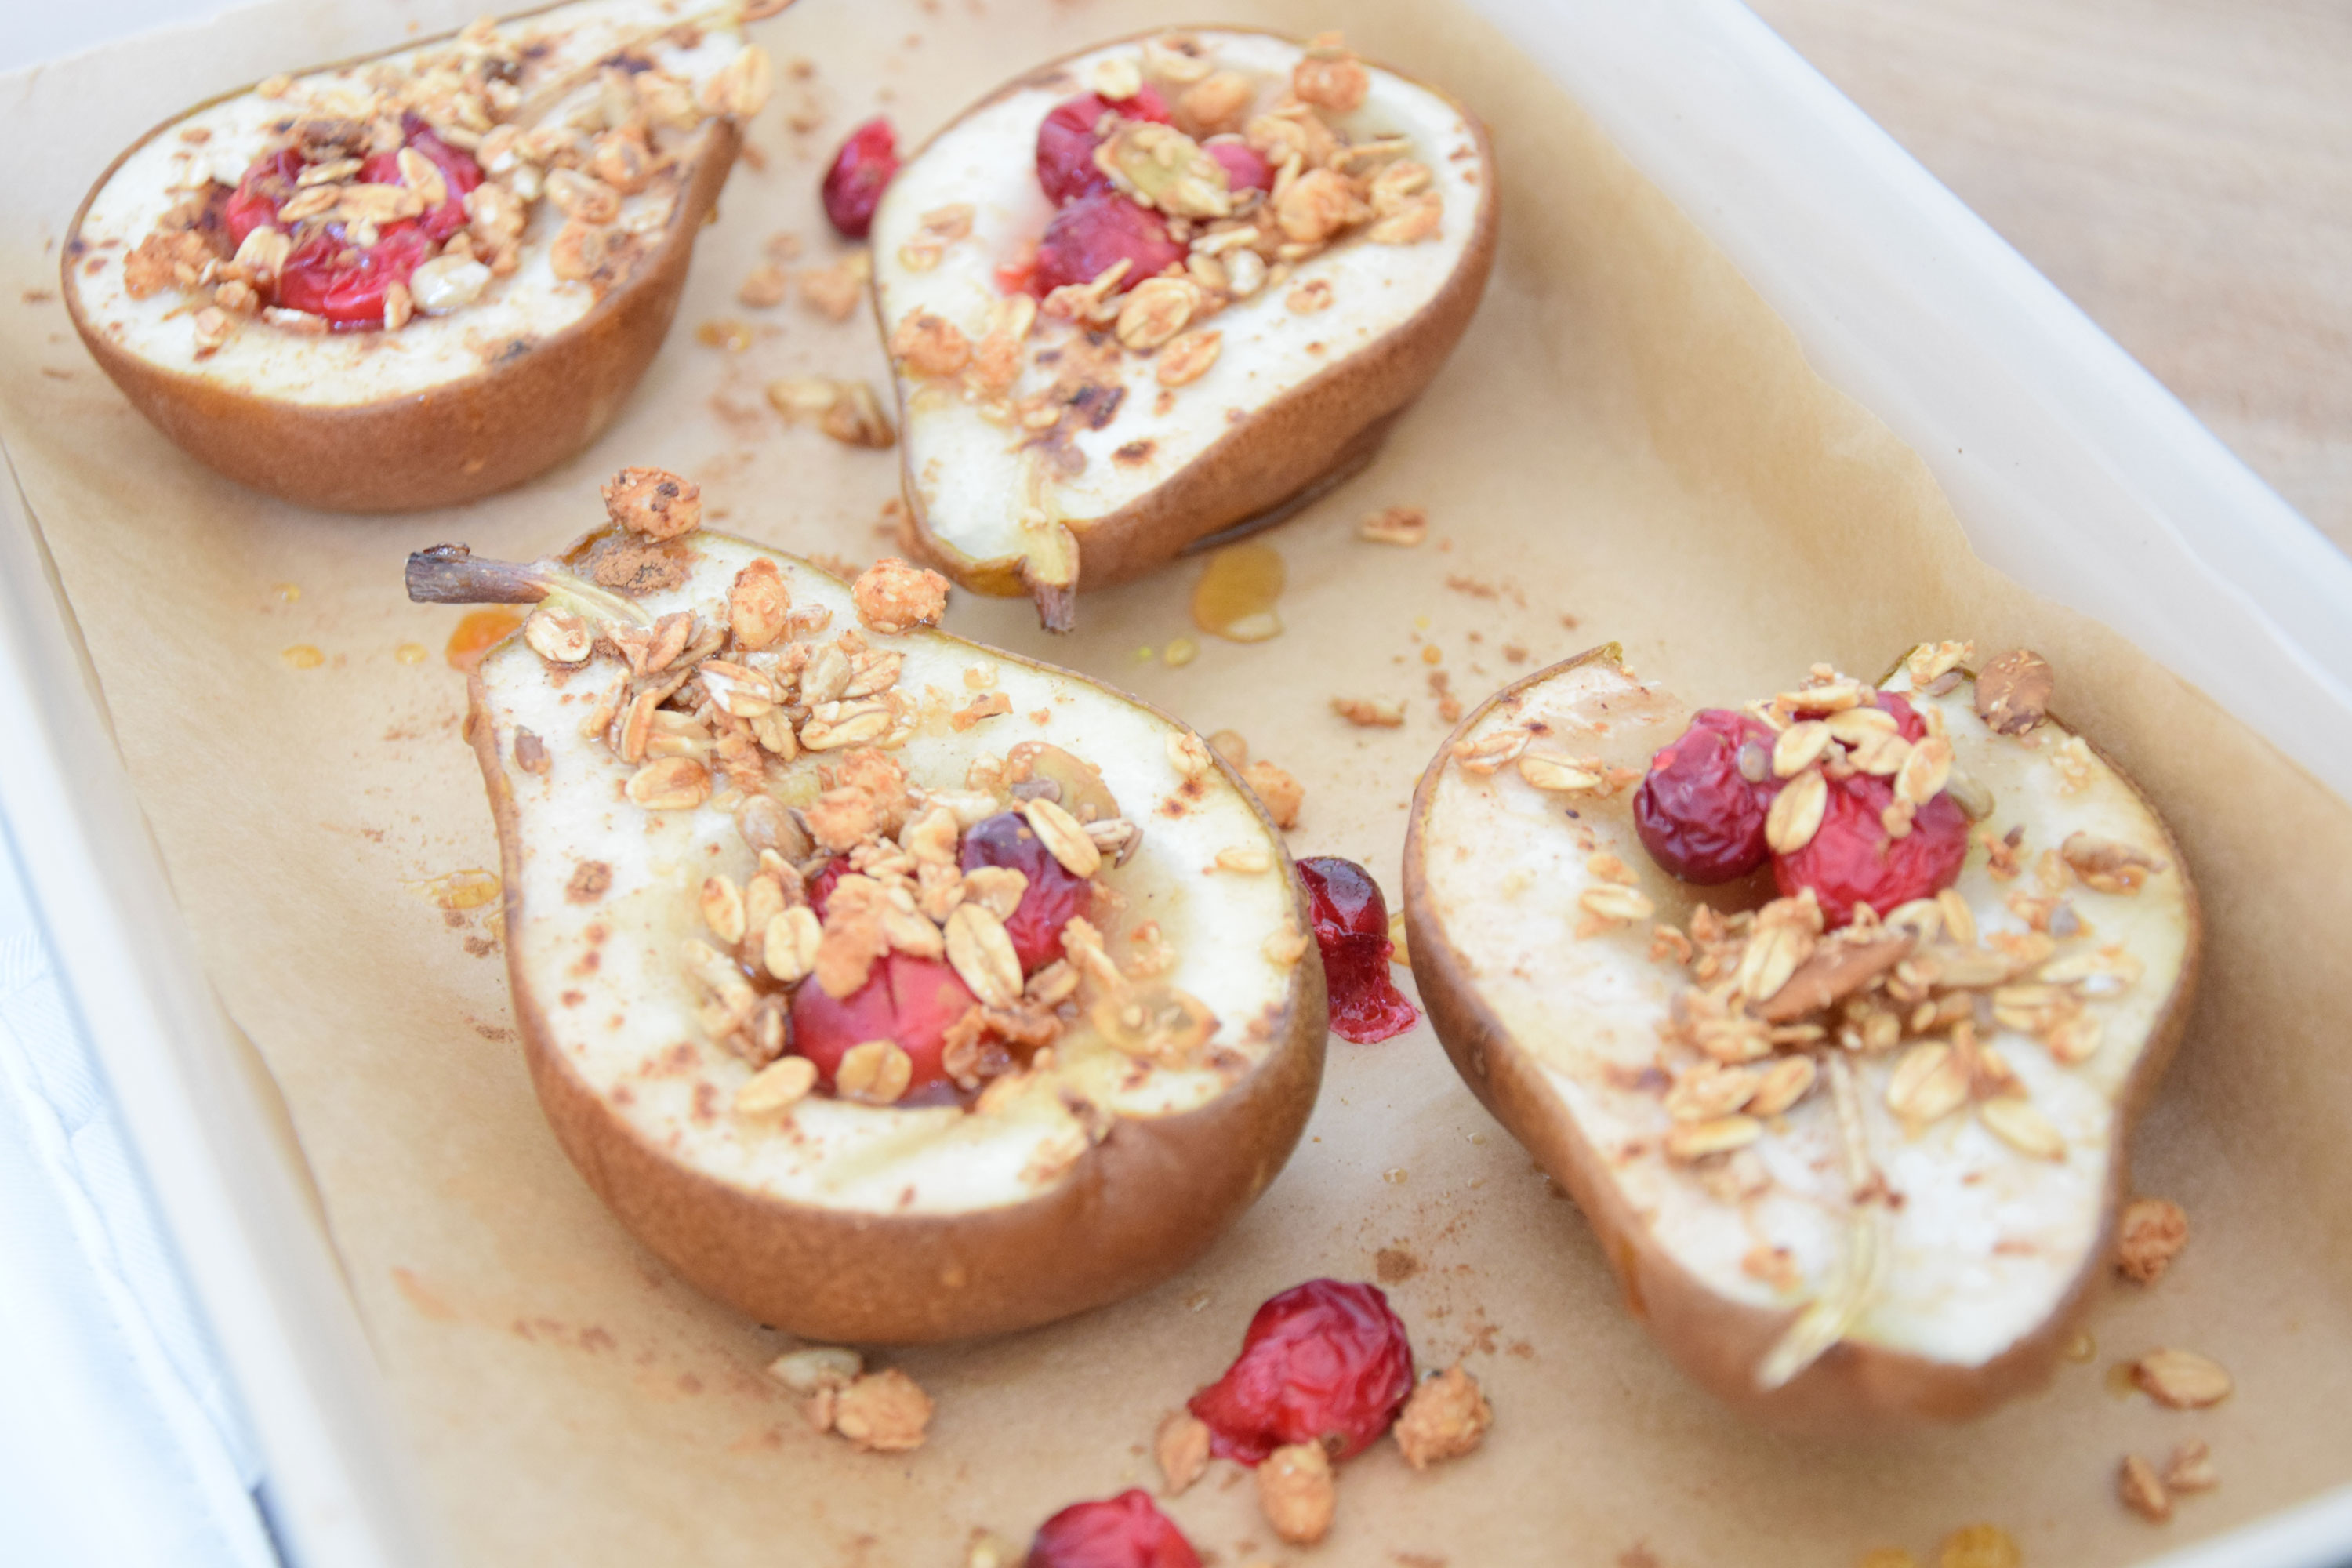 Baked pears with cranberries and XAVIES' Kokos Kaneel  Granola topping